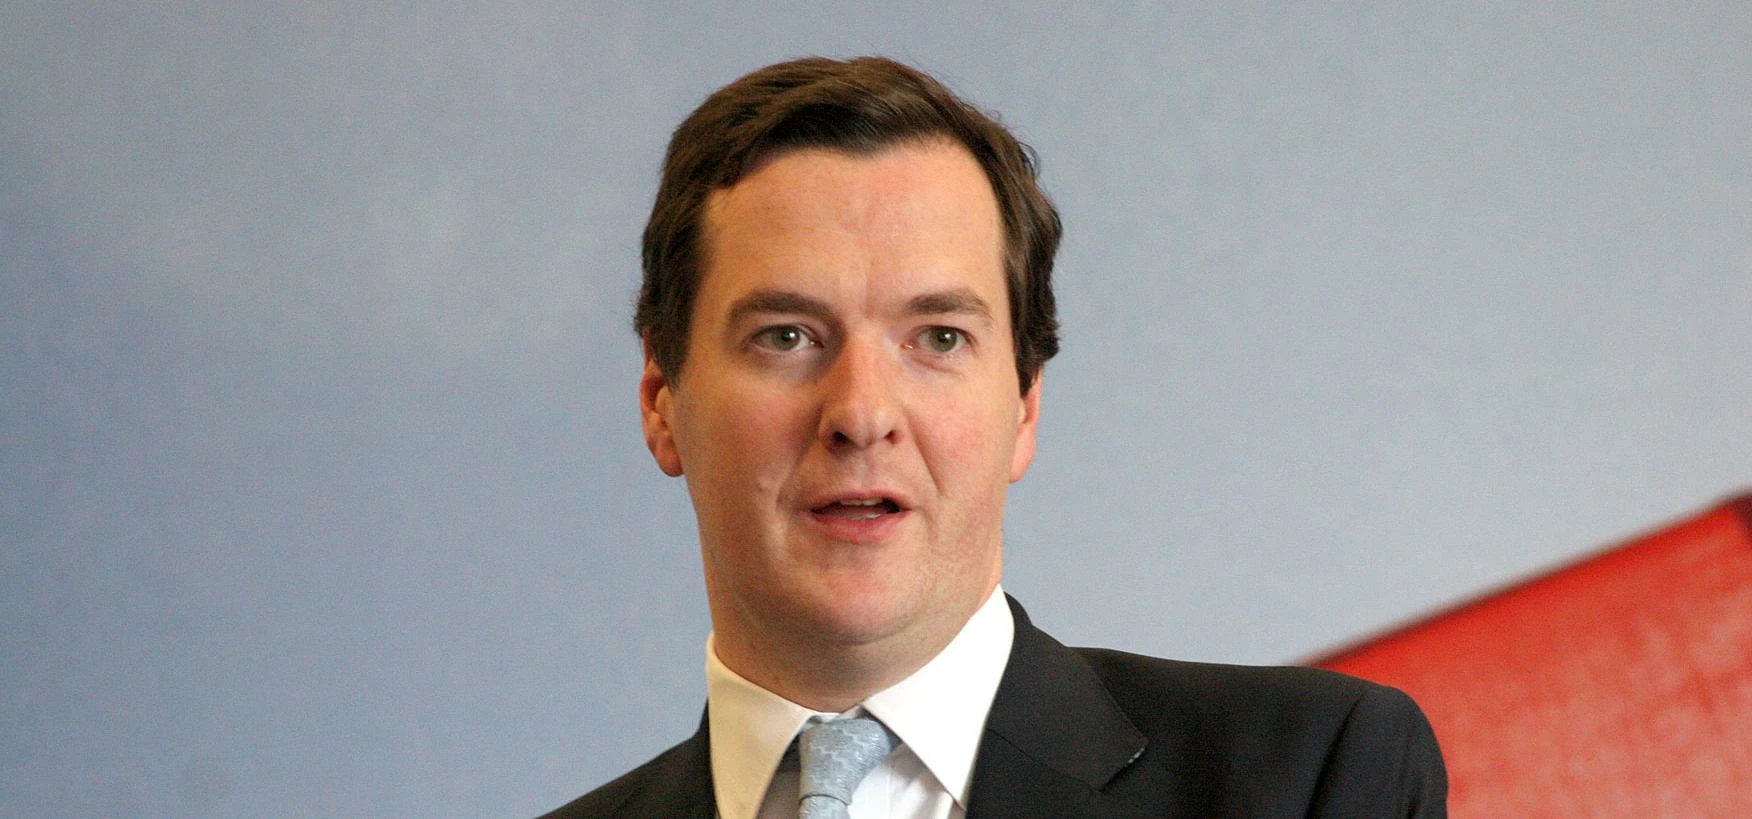 George Osborne has a responsibility to do more for SMEs